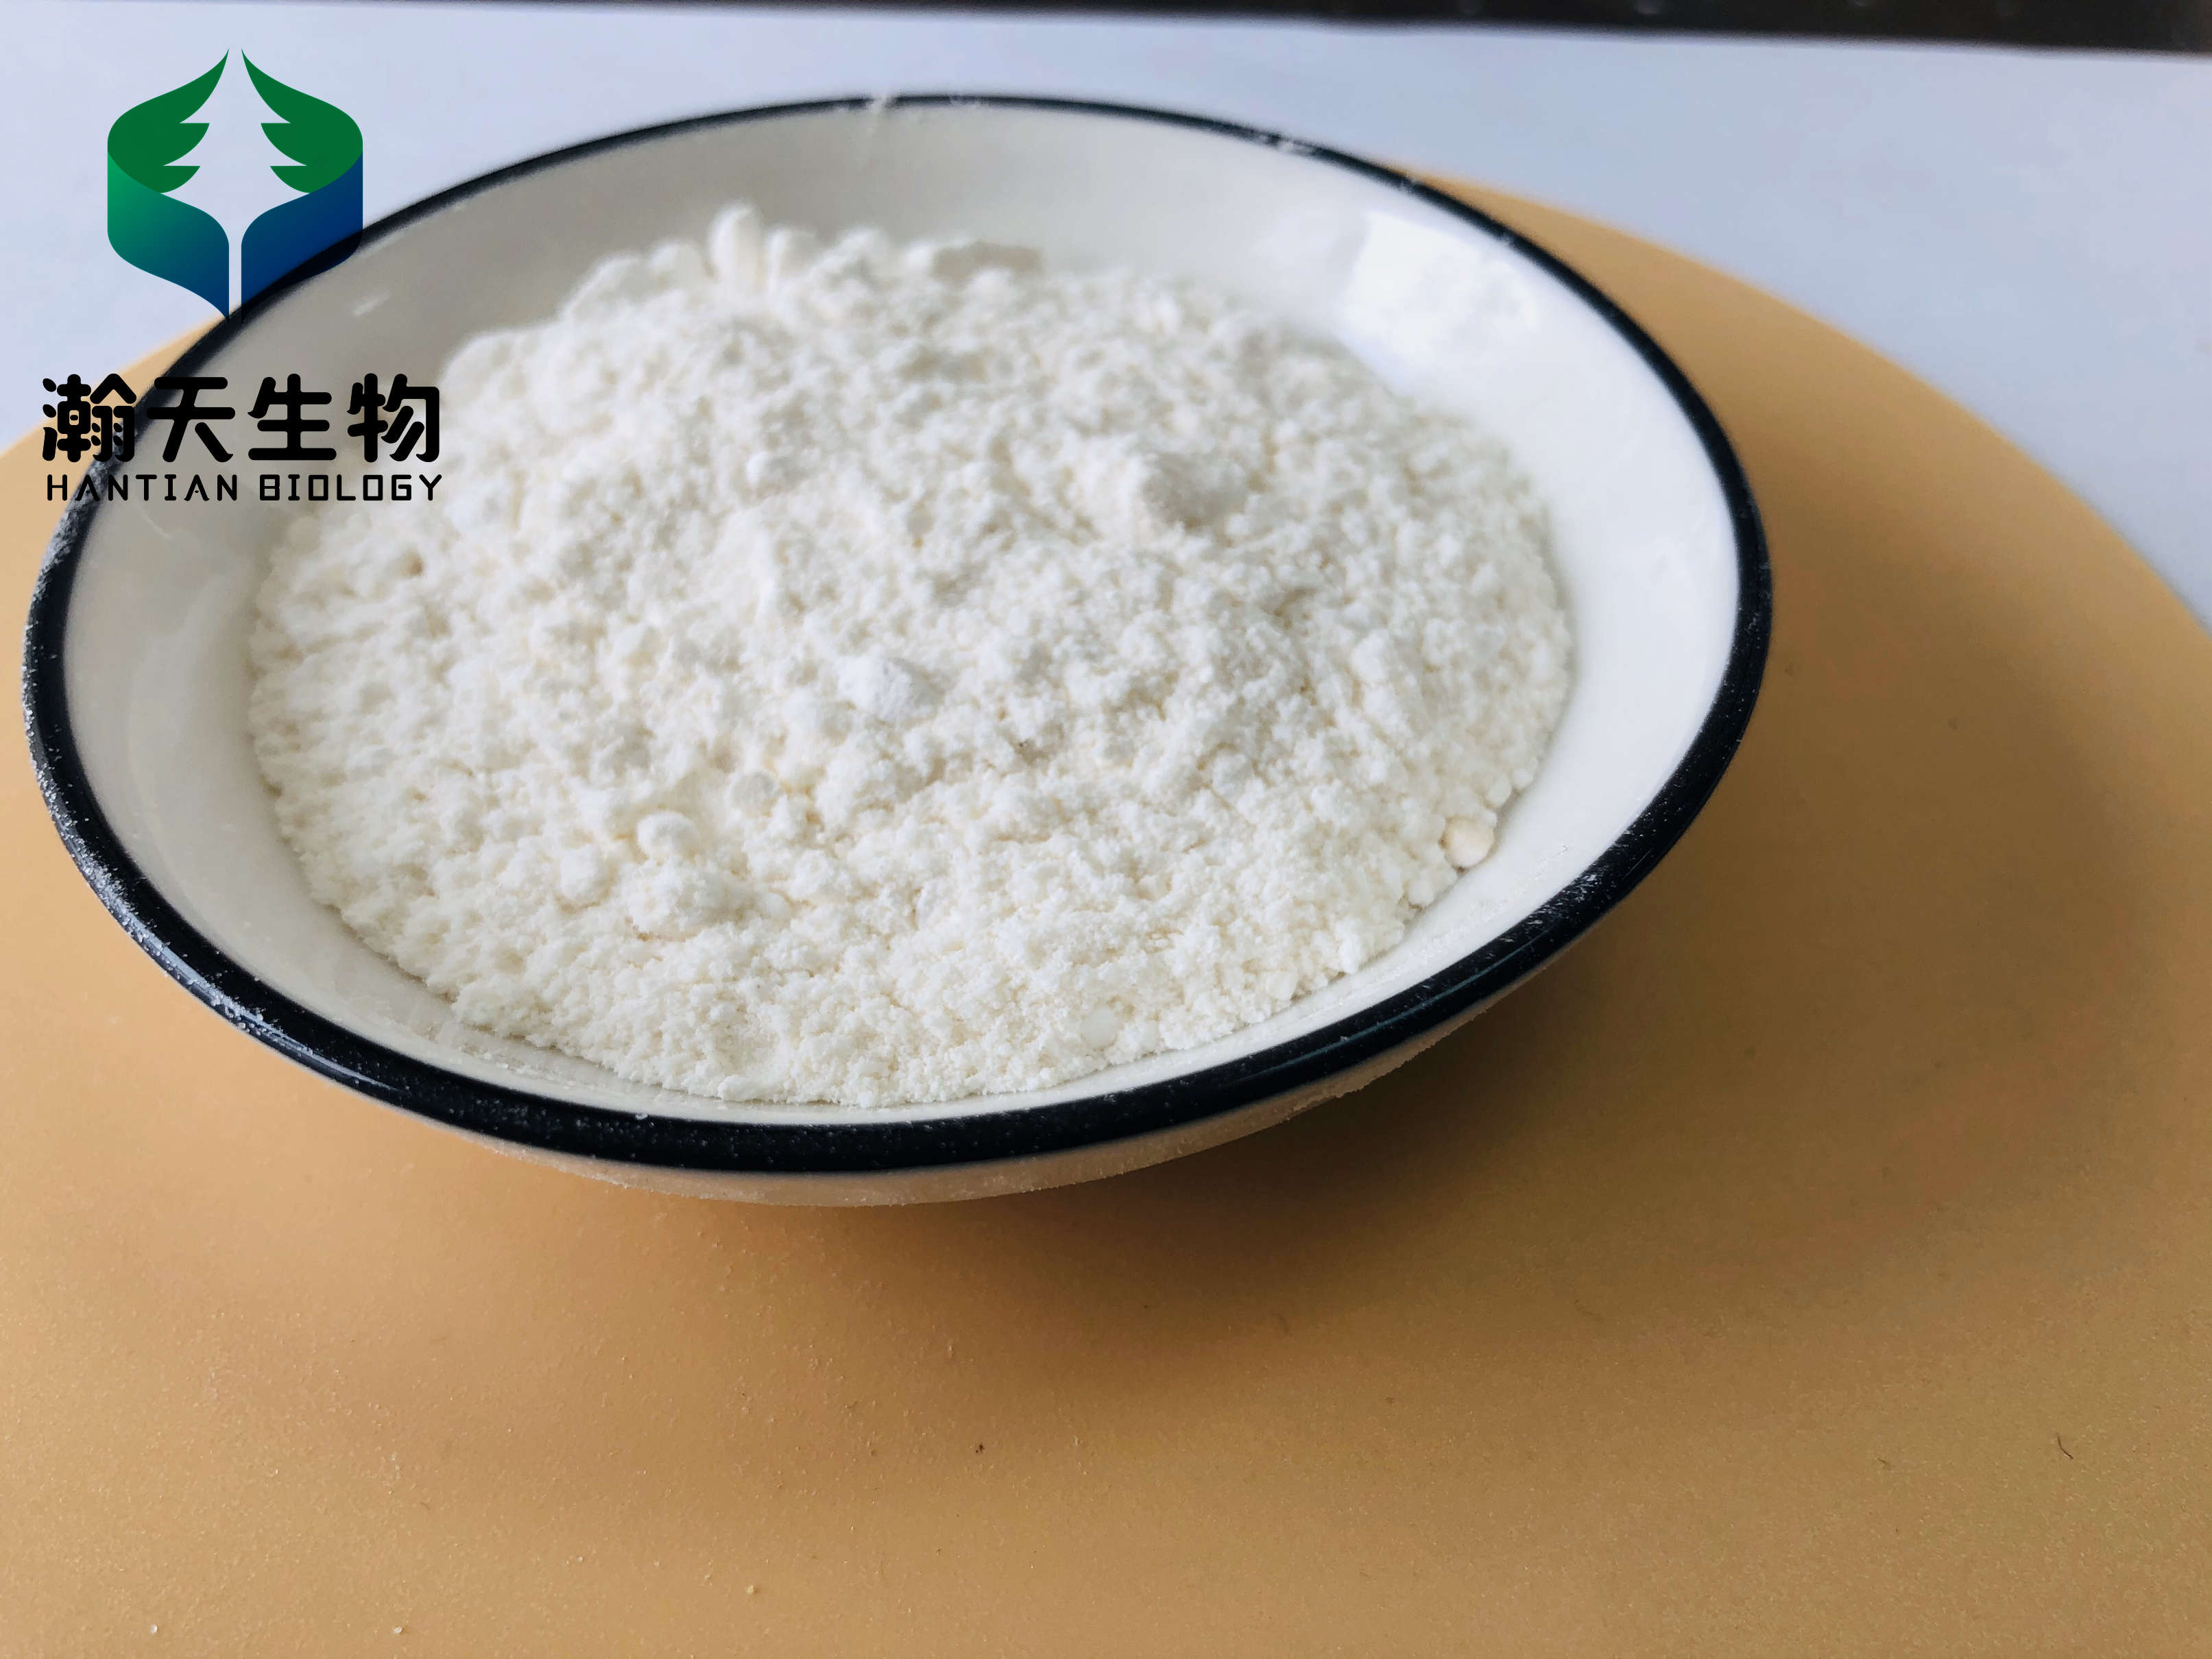 RAD 140 replacement TLB 150 benzoate powder